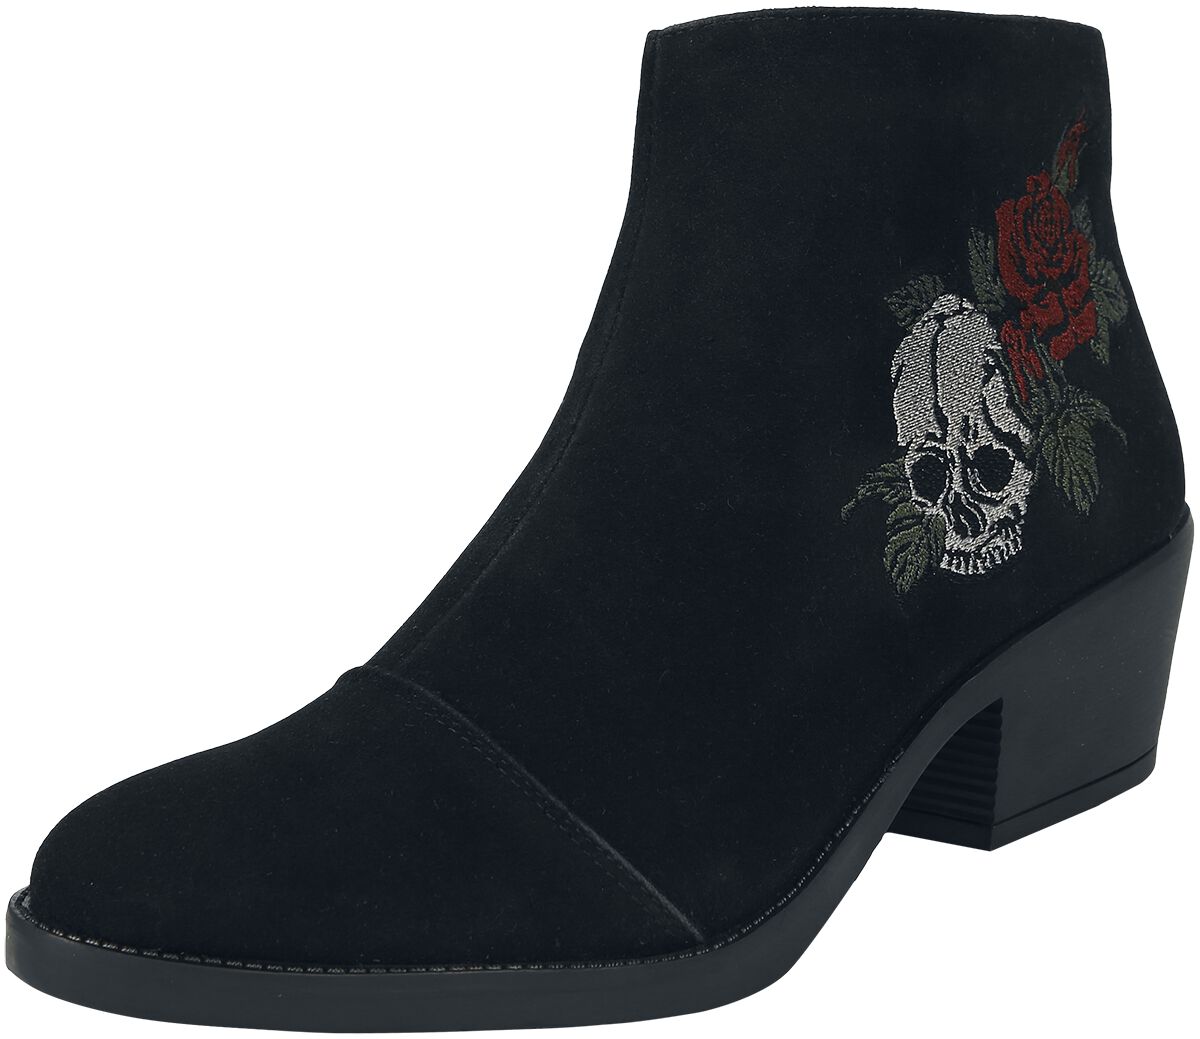 Rock Rebel by EMP Boot with Rose an Skull embroidery Stiefel schwarz in EU39